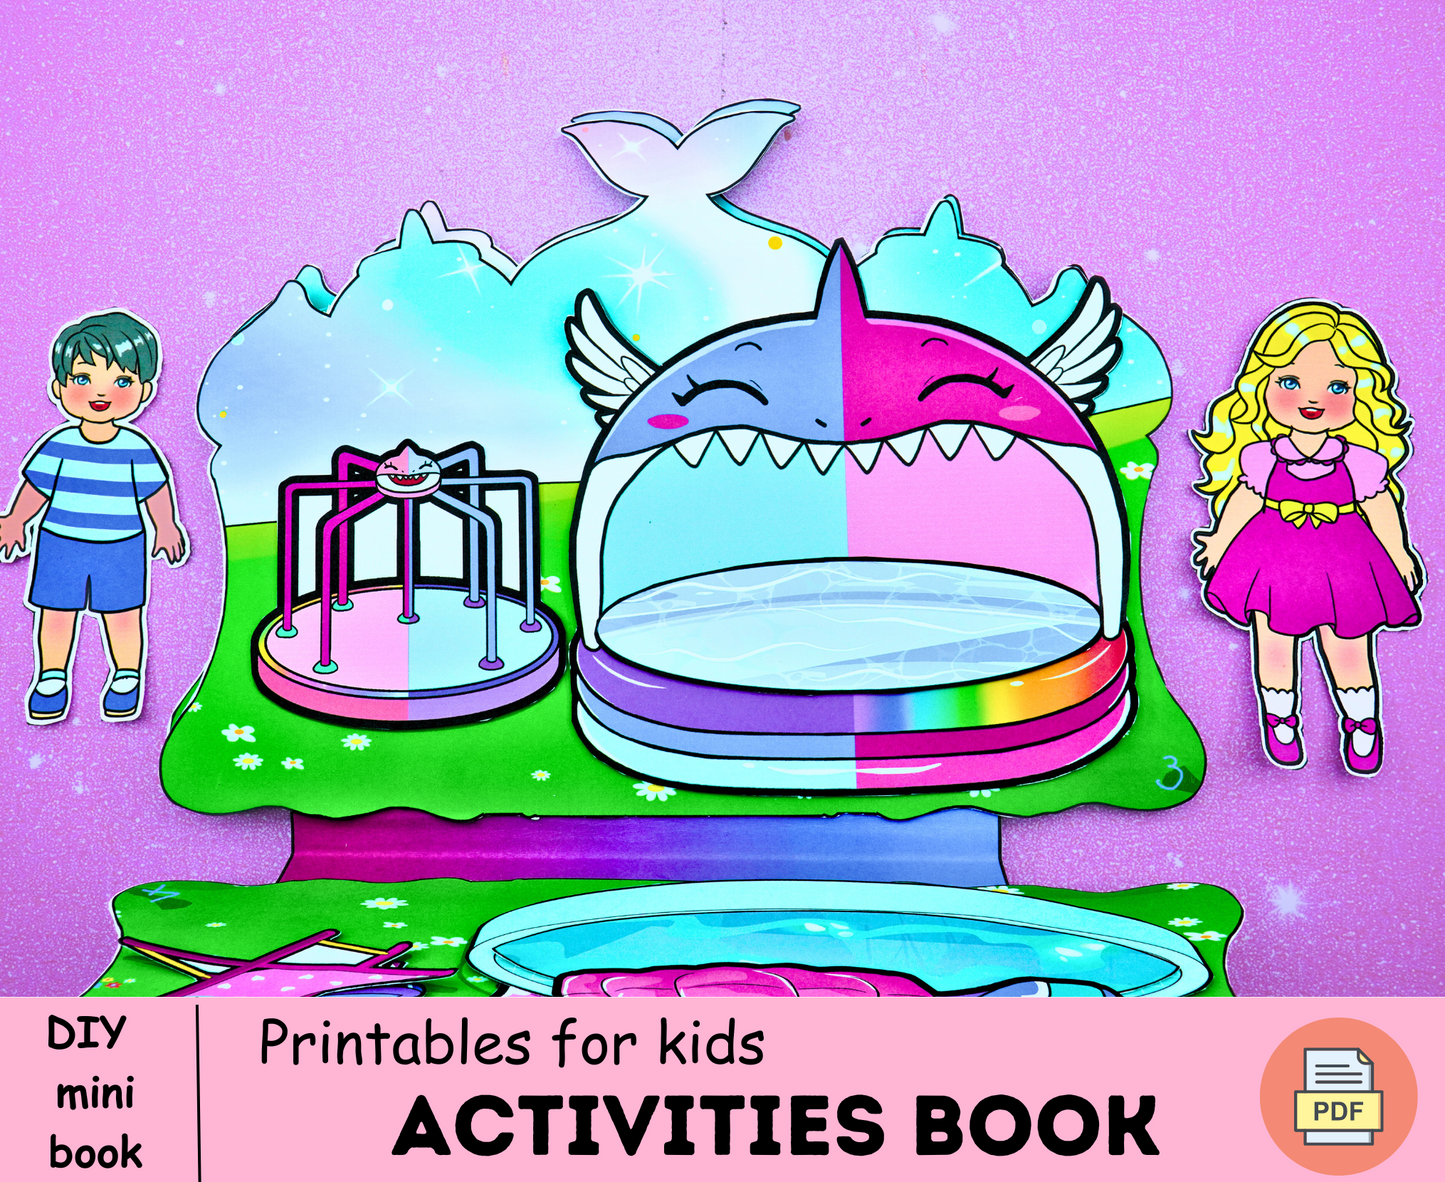 Barbie water park printables 🌊 DIY kit for your little one - Paper doll house - Activity book for kids 🌊 Woa Doll Crafts